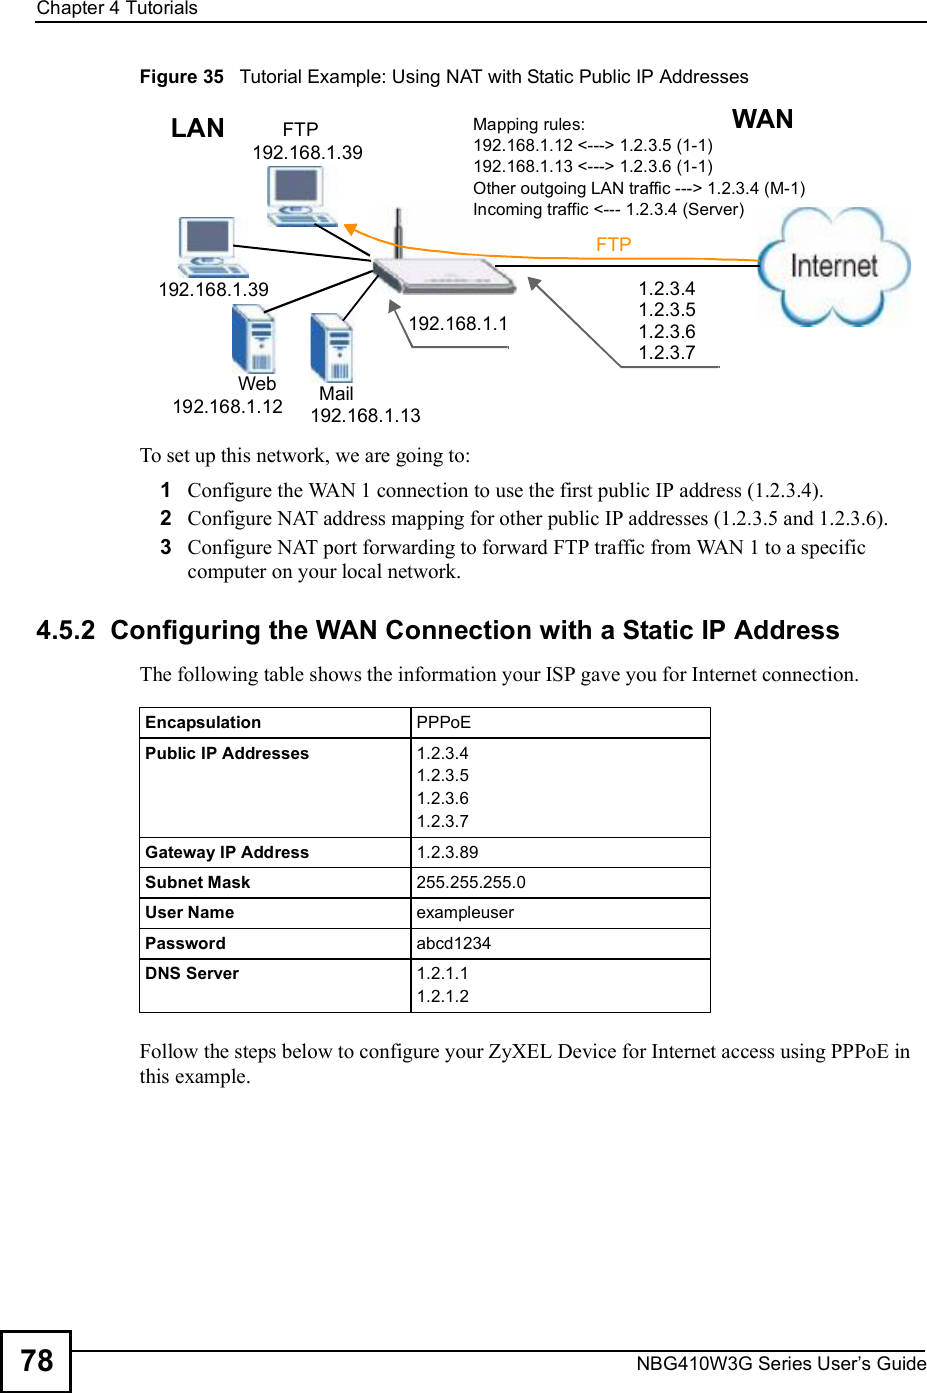 Chapter 4TutorialsNBG410W3G Series User s Guide78Figure 35   Tutorial Example: Using NAT with Static Public IP AddressesTo set up this network, we are going to:1Configure the WAN 1 connection to use the first public IP address (1.2.3.4).2Configure NAT address mapping for other public IP addresses (1.2.3.5 and 1.2.3.6).3Configure NAT port forwarding to forward FTP traffic from WAN 1 to a specific computer on your local network.4.5.2  Configuring the WAN Connection with a Static IP AddressThe following table shows the information your ISP gave you for Internet connection.  Follow the steps below to configure your ZyXEL Device for Internet access using PPPoE in this example.FTPFTP 192.168.1.39192.168.1.39192.168.1.12 192.168.1.13MailWeb192.168.1.11.2.3.41.2.3.51.2.3.61.2.3.7WANLAN Mapping rules:192.168.1.12 &lt;---&gt; 1.2.3.5 (1-1)192.168.1.13 &lt;---&gt; 1.2.3.6 (1-1)Other outgoing LAN traffic ---&gt; 1.2.3.4 (M-1)Incoming traffic &lt;--- 1.2.3.4 (Server)Encapsulation PPPoEPublic IP Addresses 1.2.3.4 1.2.3.51.2.3.61.2.3.7Gateway IP Address 1.2.3.89Subnet Mask 255.255.255.0User Name exampleuserPassword abcd1234DNS Server 1.2.1.11.2.1.2